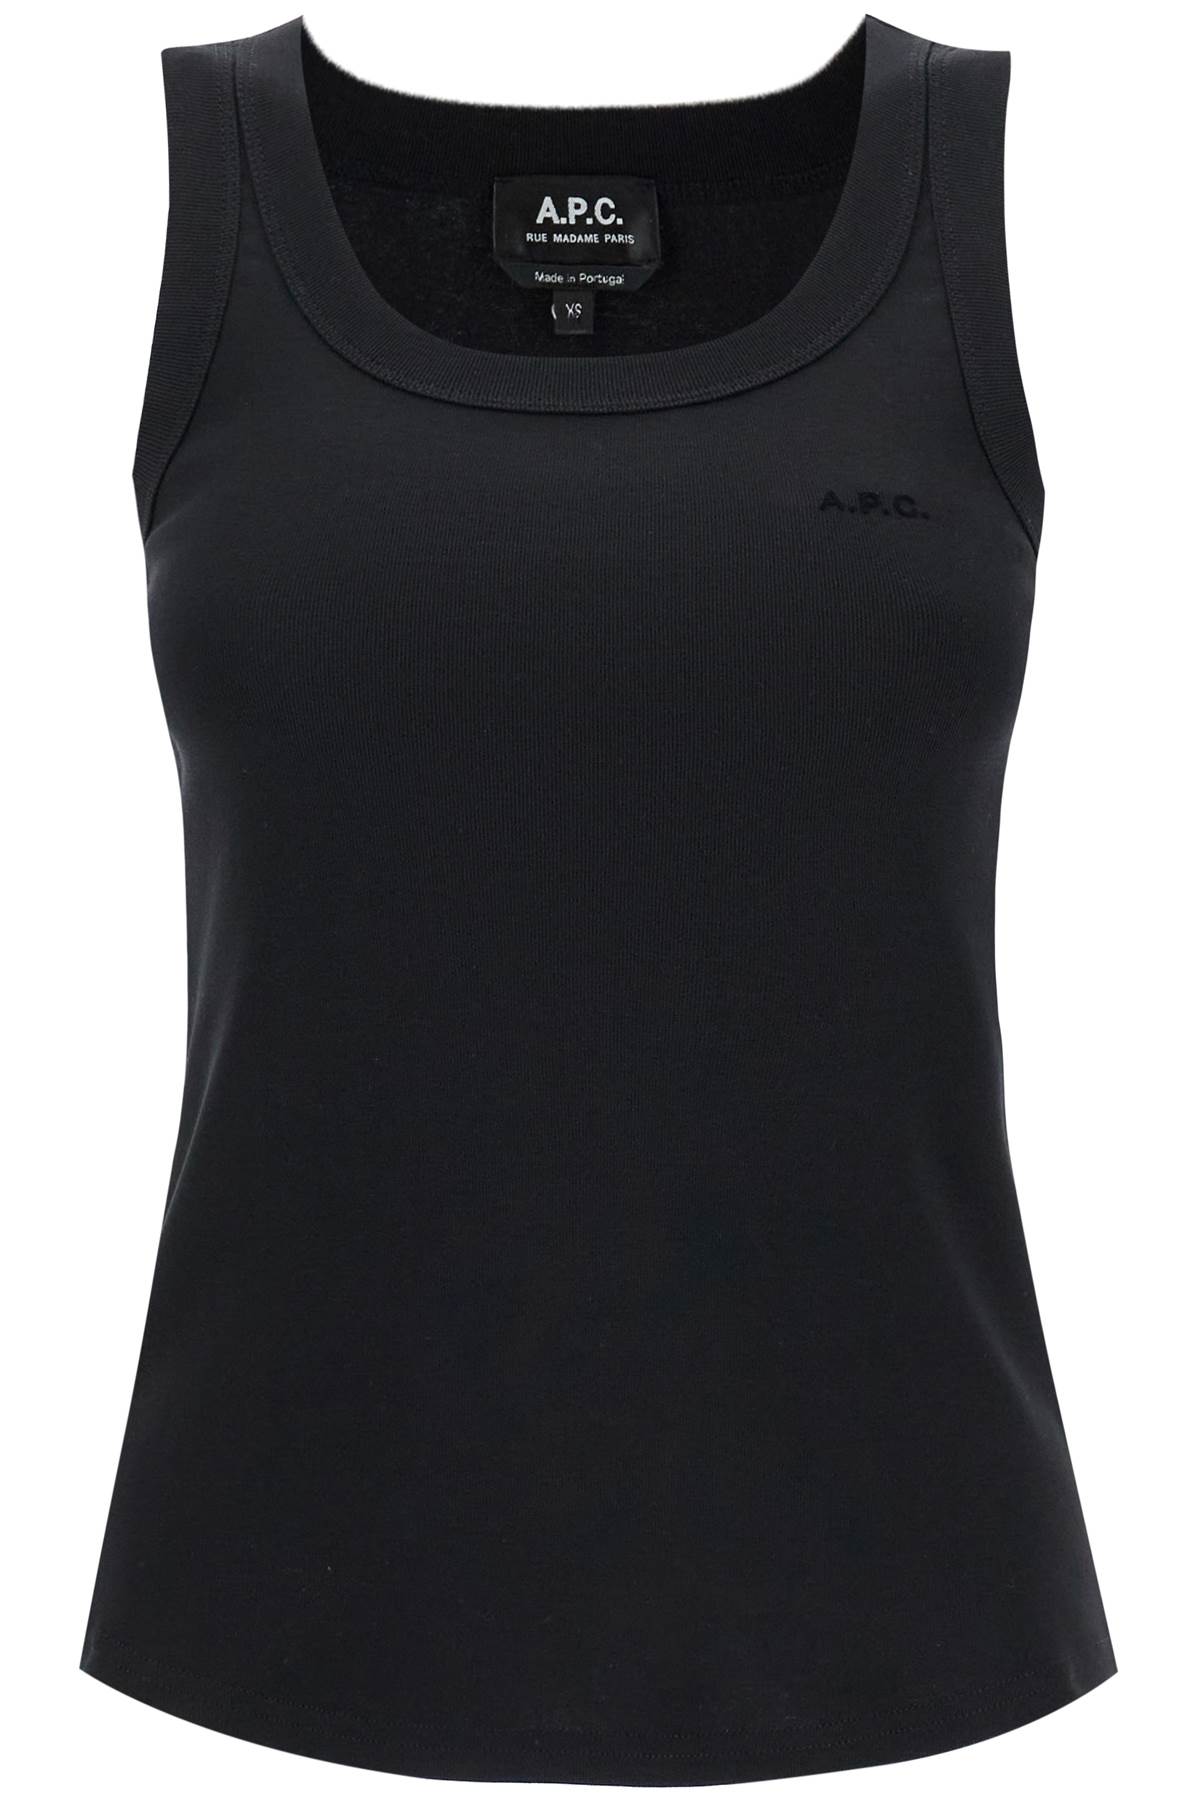 A. P.C. Agathe Tank Top For